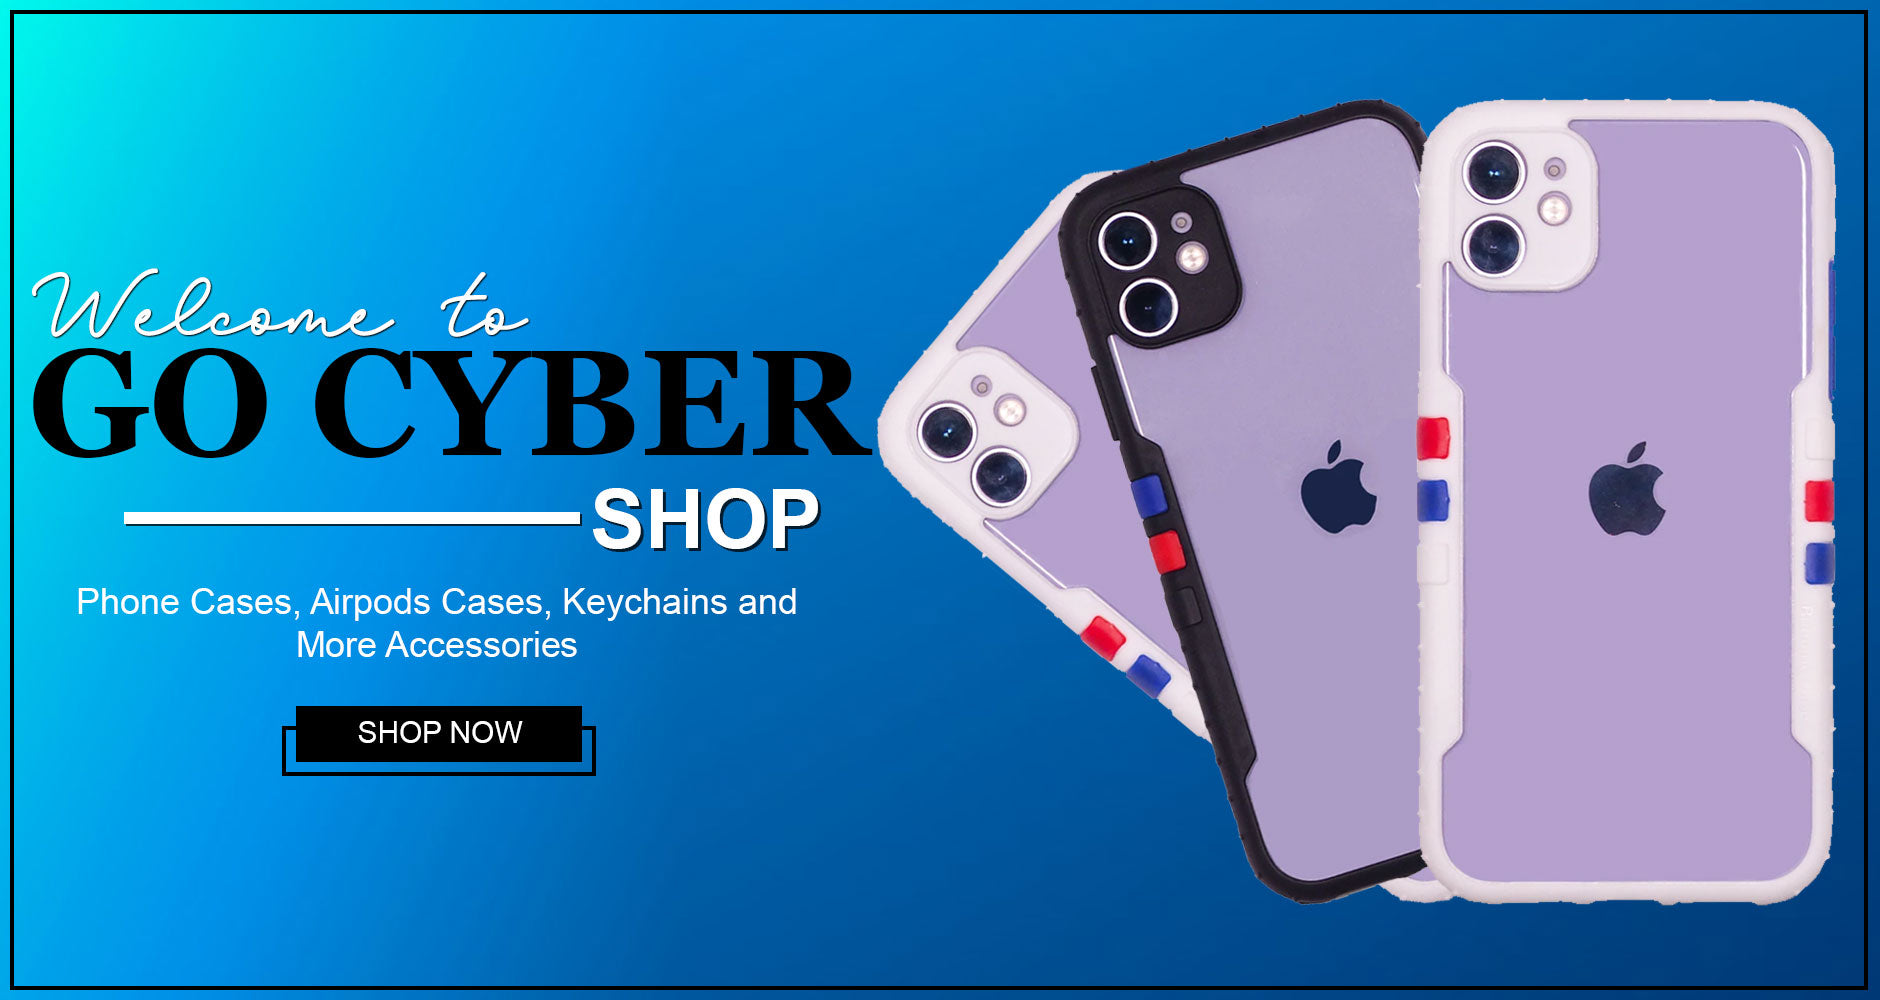 GO CYBER SHOP